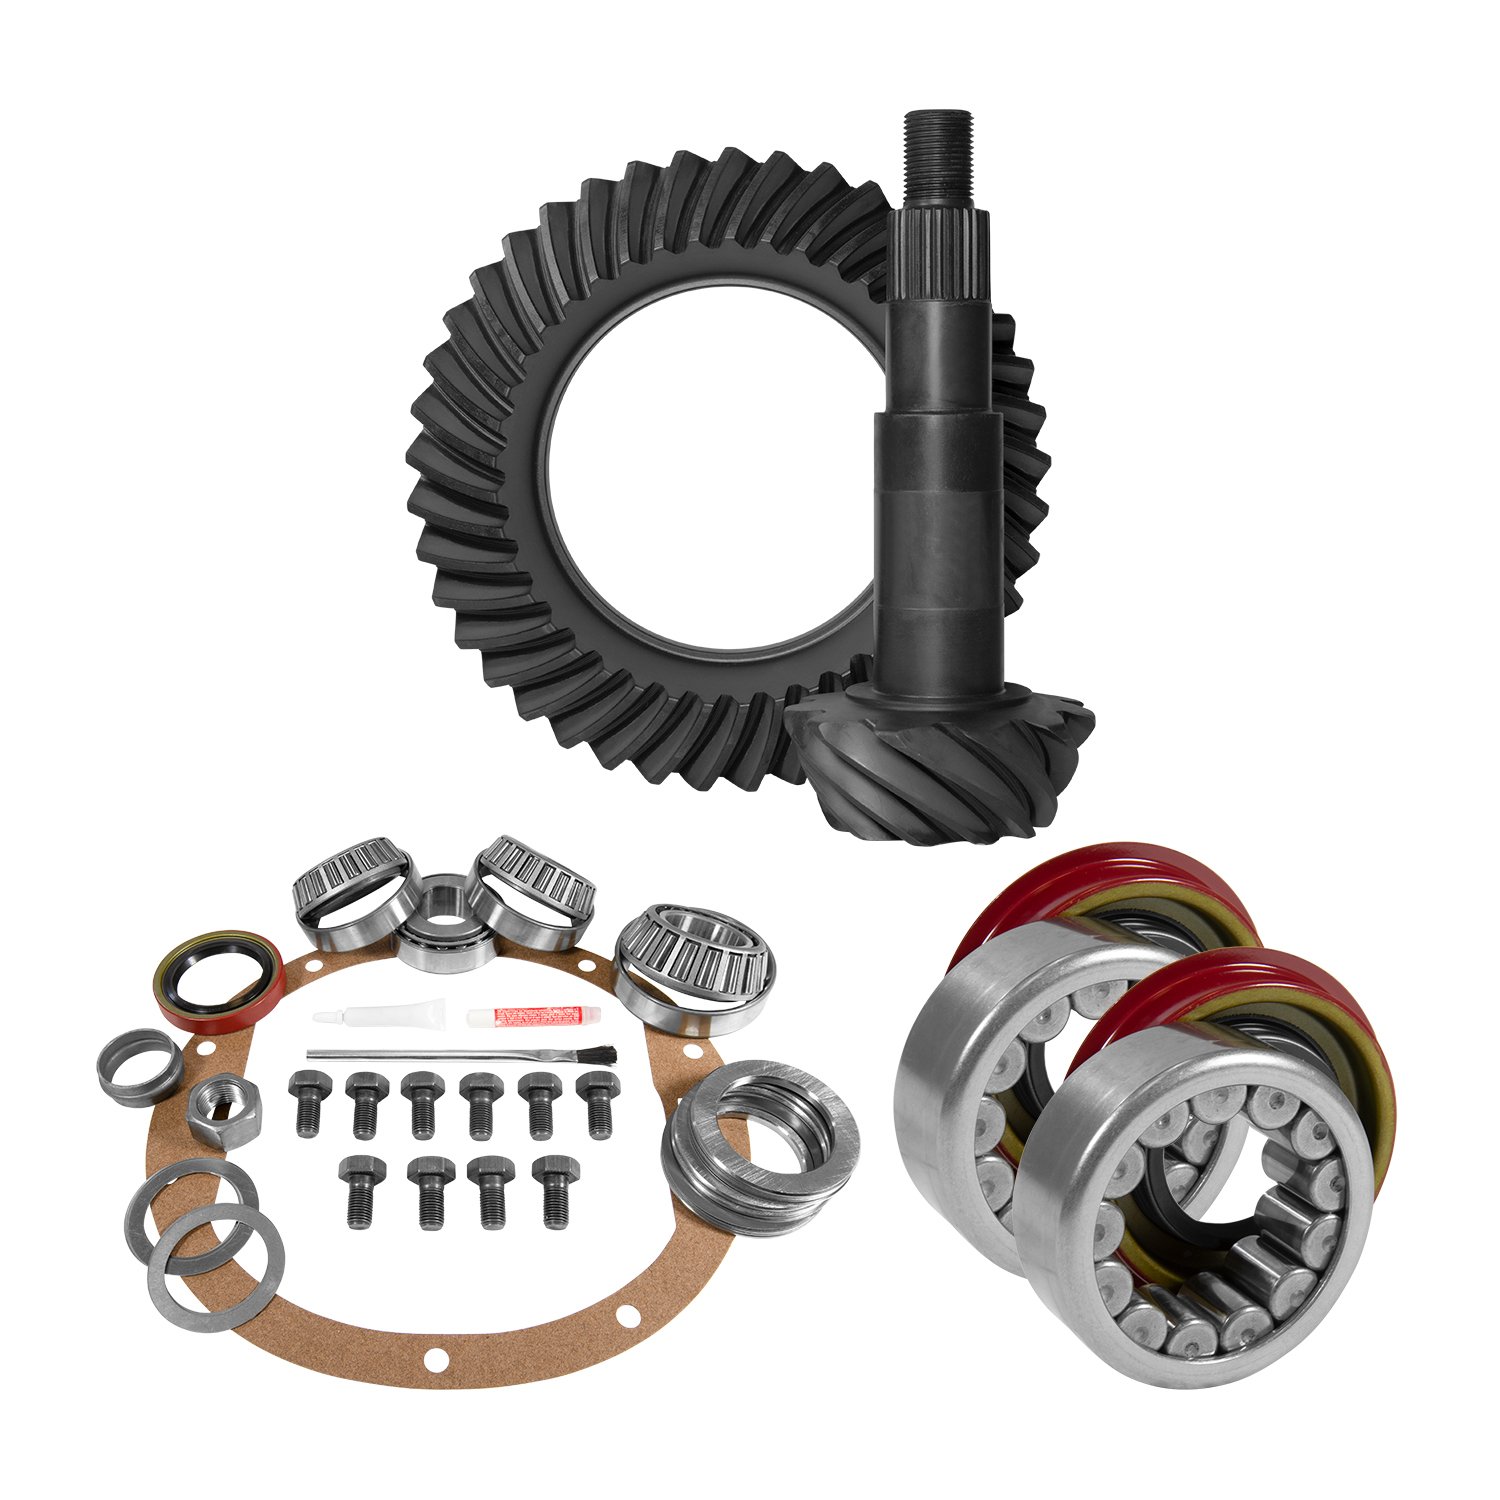 USA Standard 10725 8.5 in. GM 4.56 Rear Ring & Pinion Install Kit, Axle Bearings, 1.625 in. Case Journal